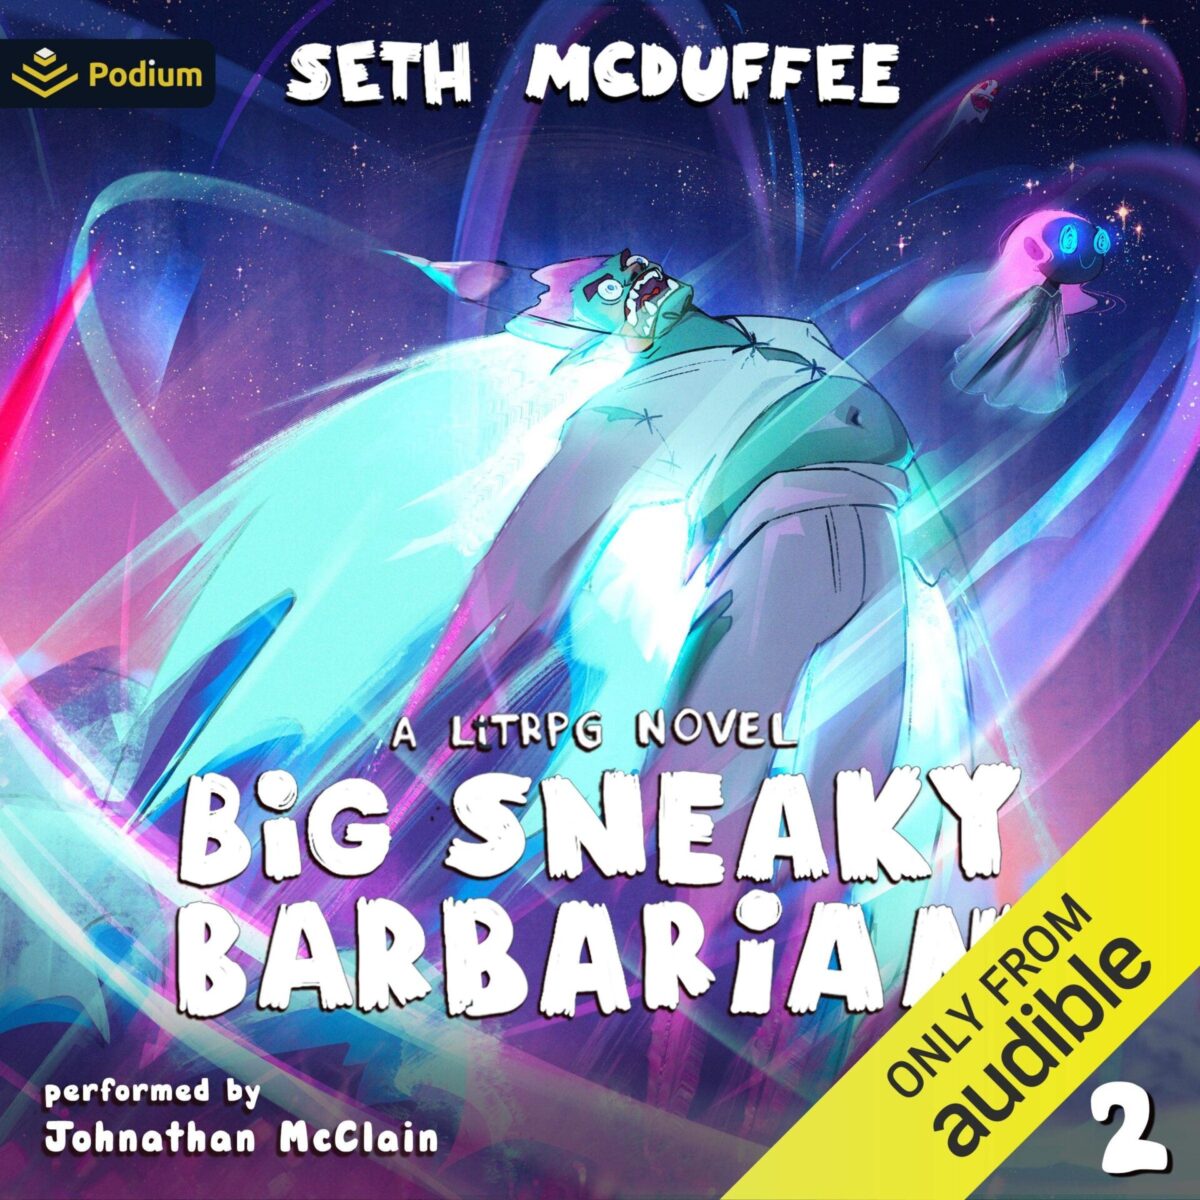 Big Sneaky Barbarian 2 – The Audiobook Review